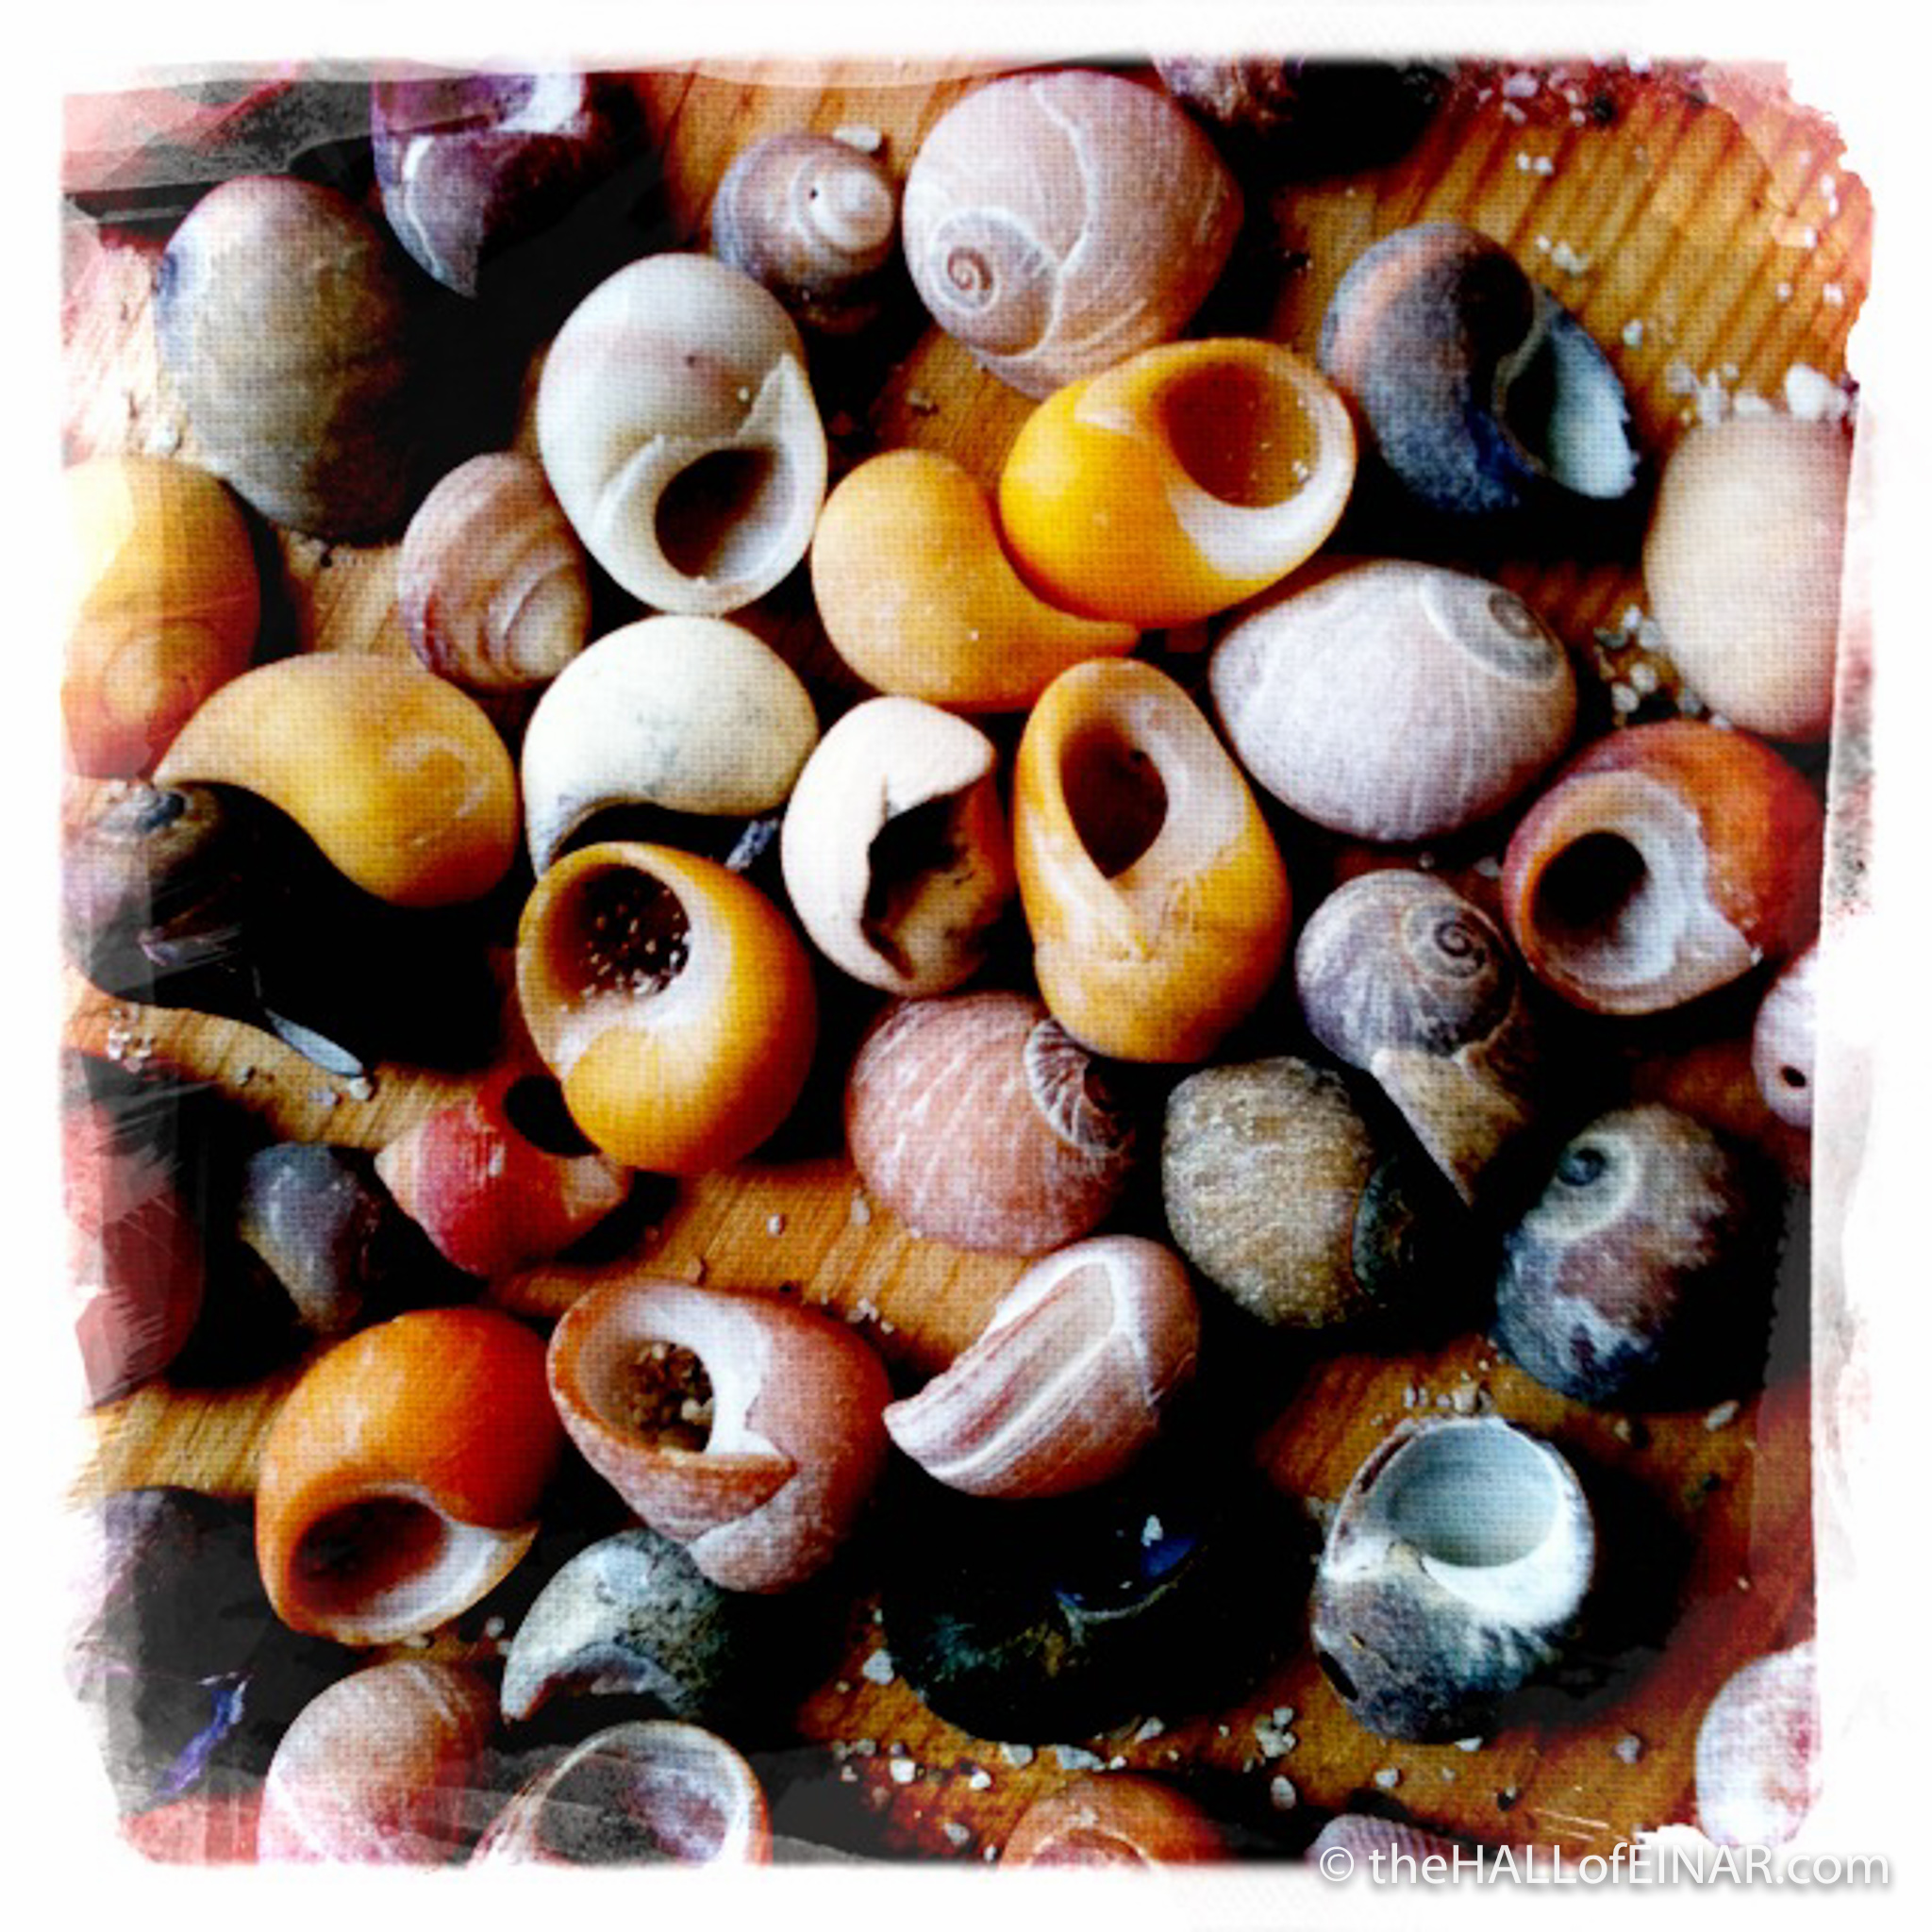 Periwinkles - photograph (c) 2016 David Bailey (not the) - The Hall of Einar